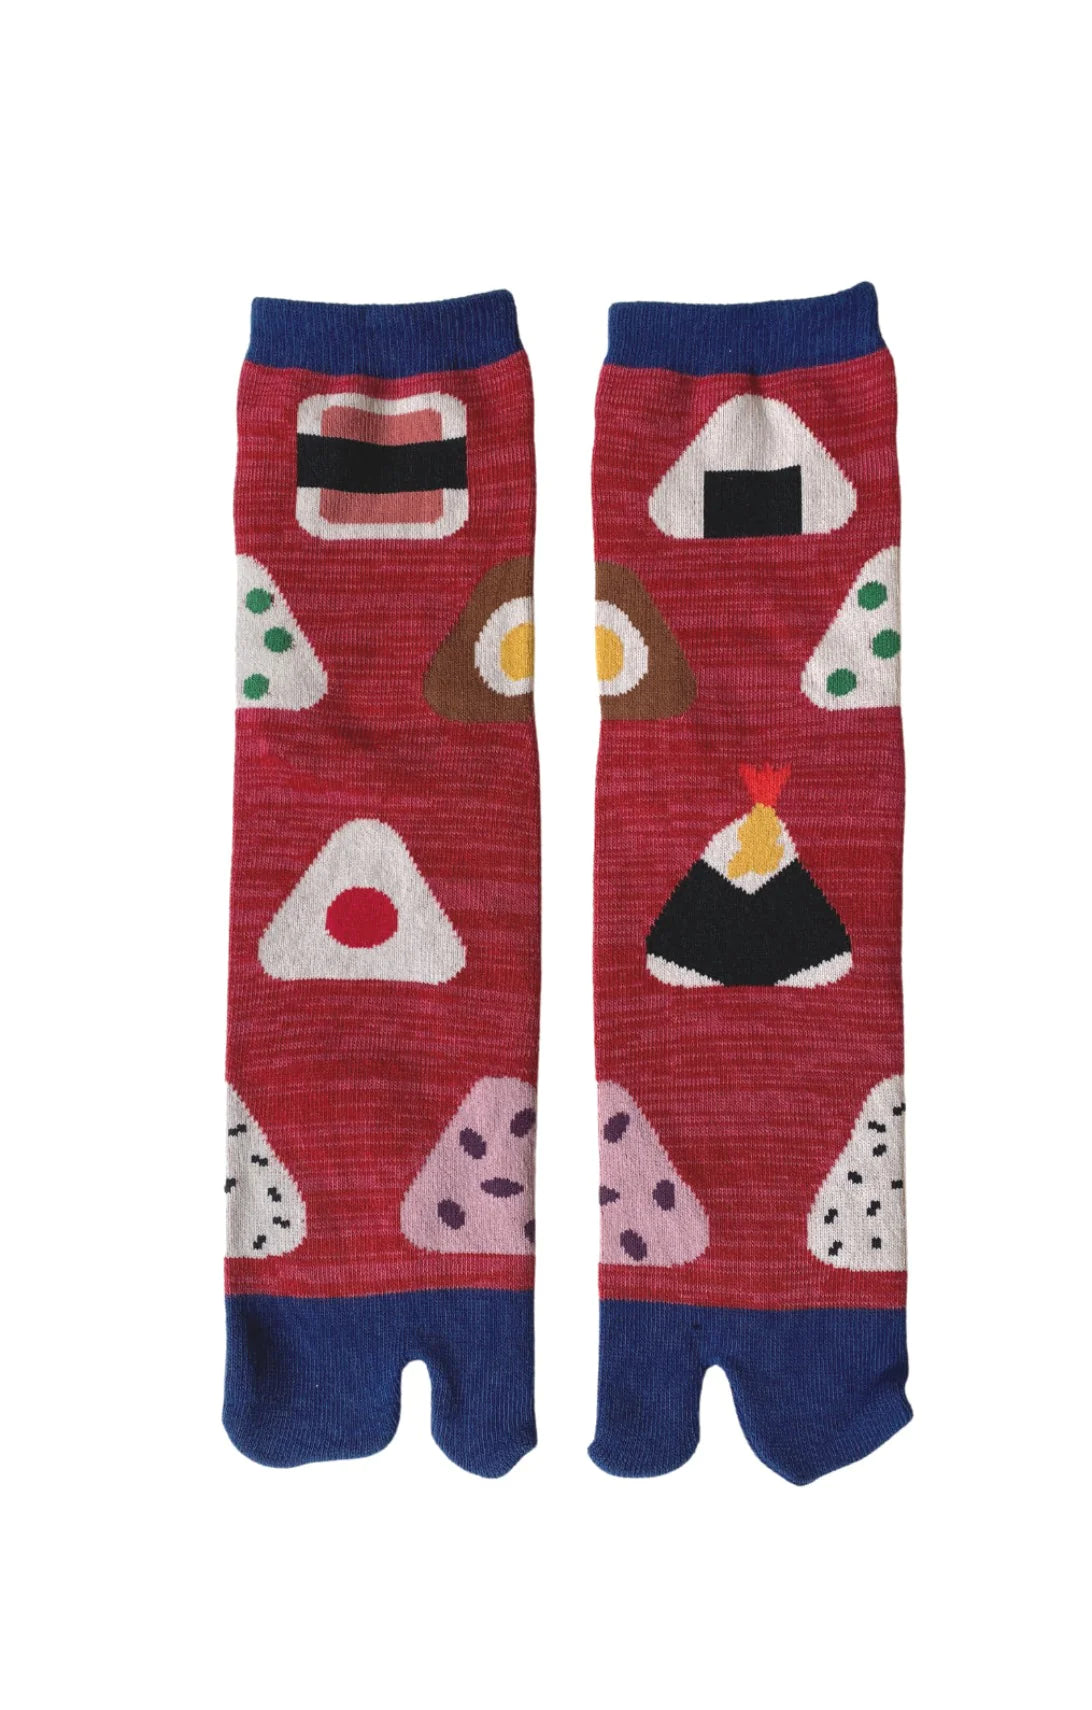 Socks by NINJA SOCKS named Rice Bowl Onigiri Tabi Toe Socks, seen from the back in RED PINK HEATHER/NAVY color with various kinds of onigiri designs